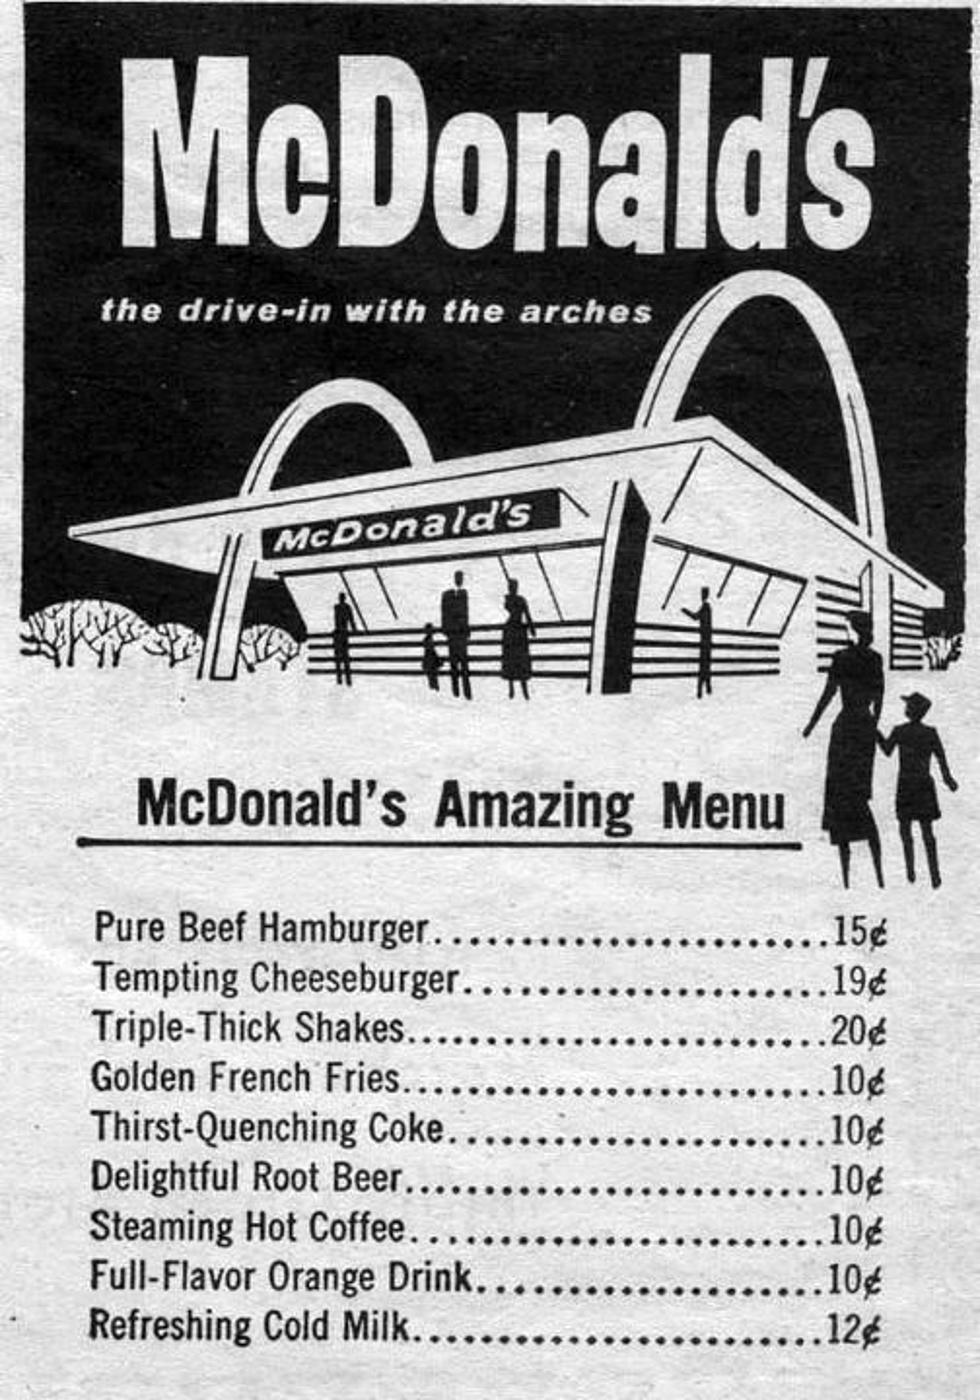 Opening 63 Years Ago, This Was Massachusetts' First McDonald's